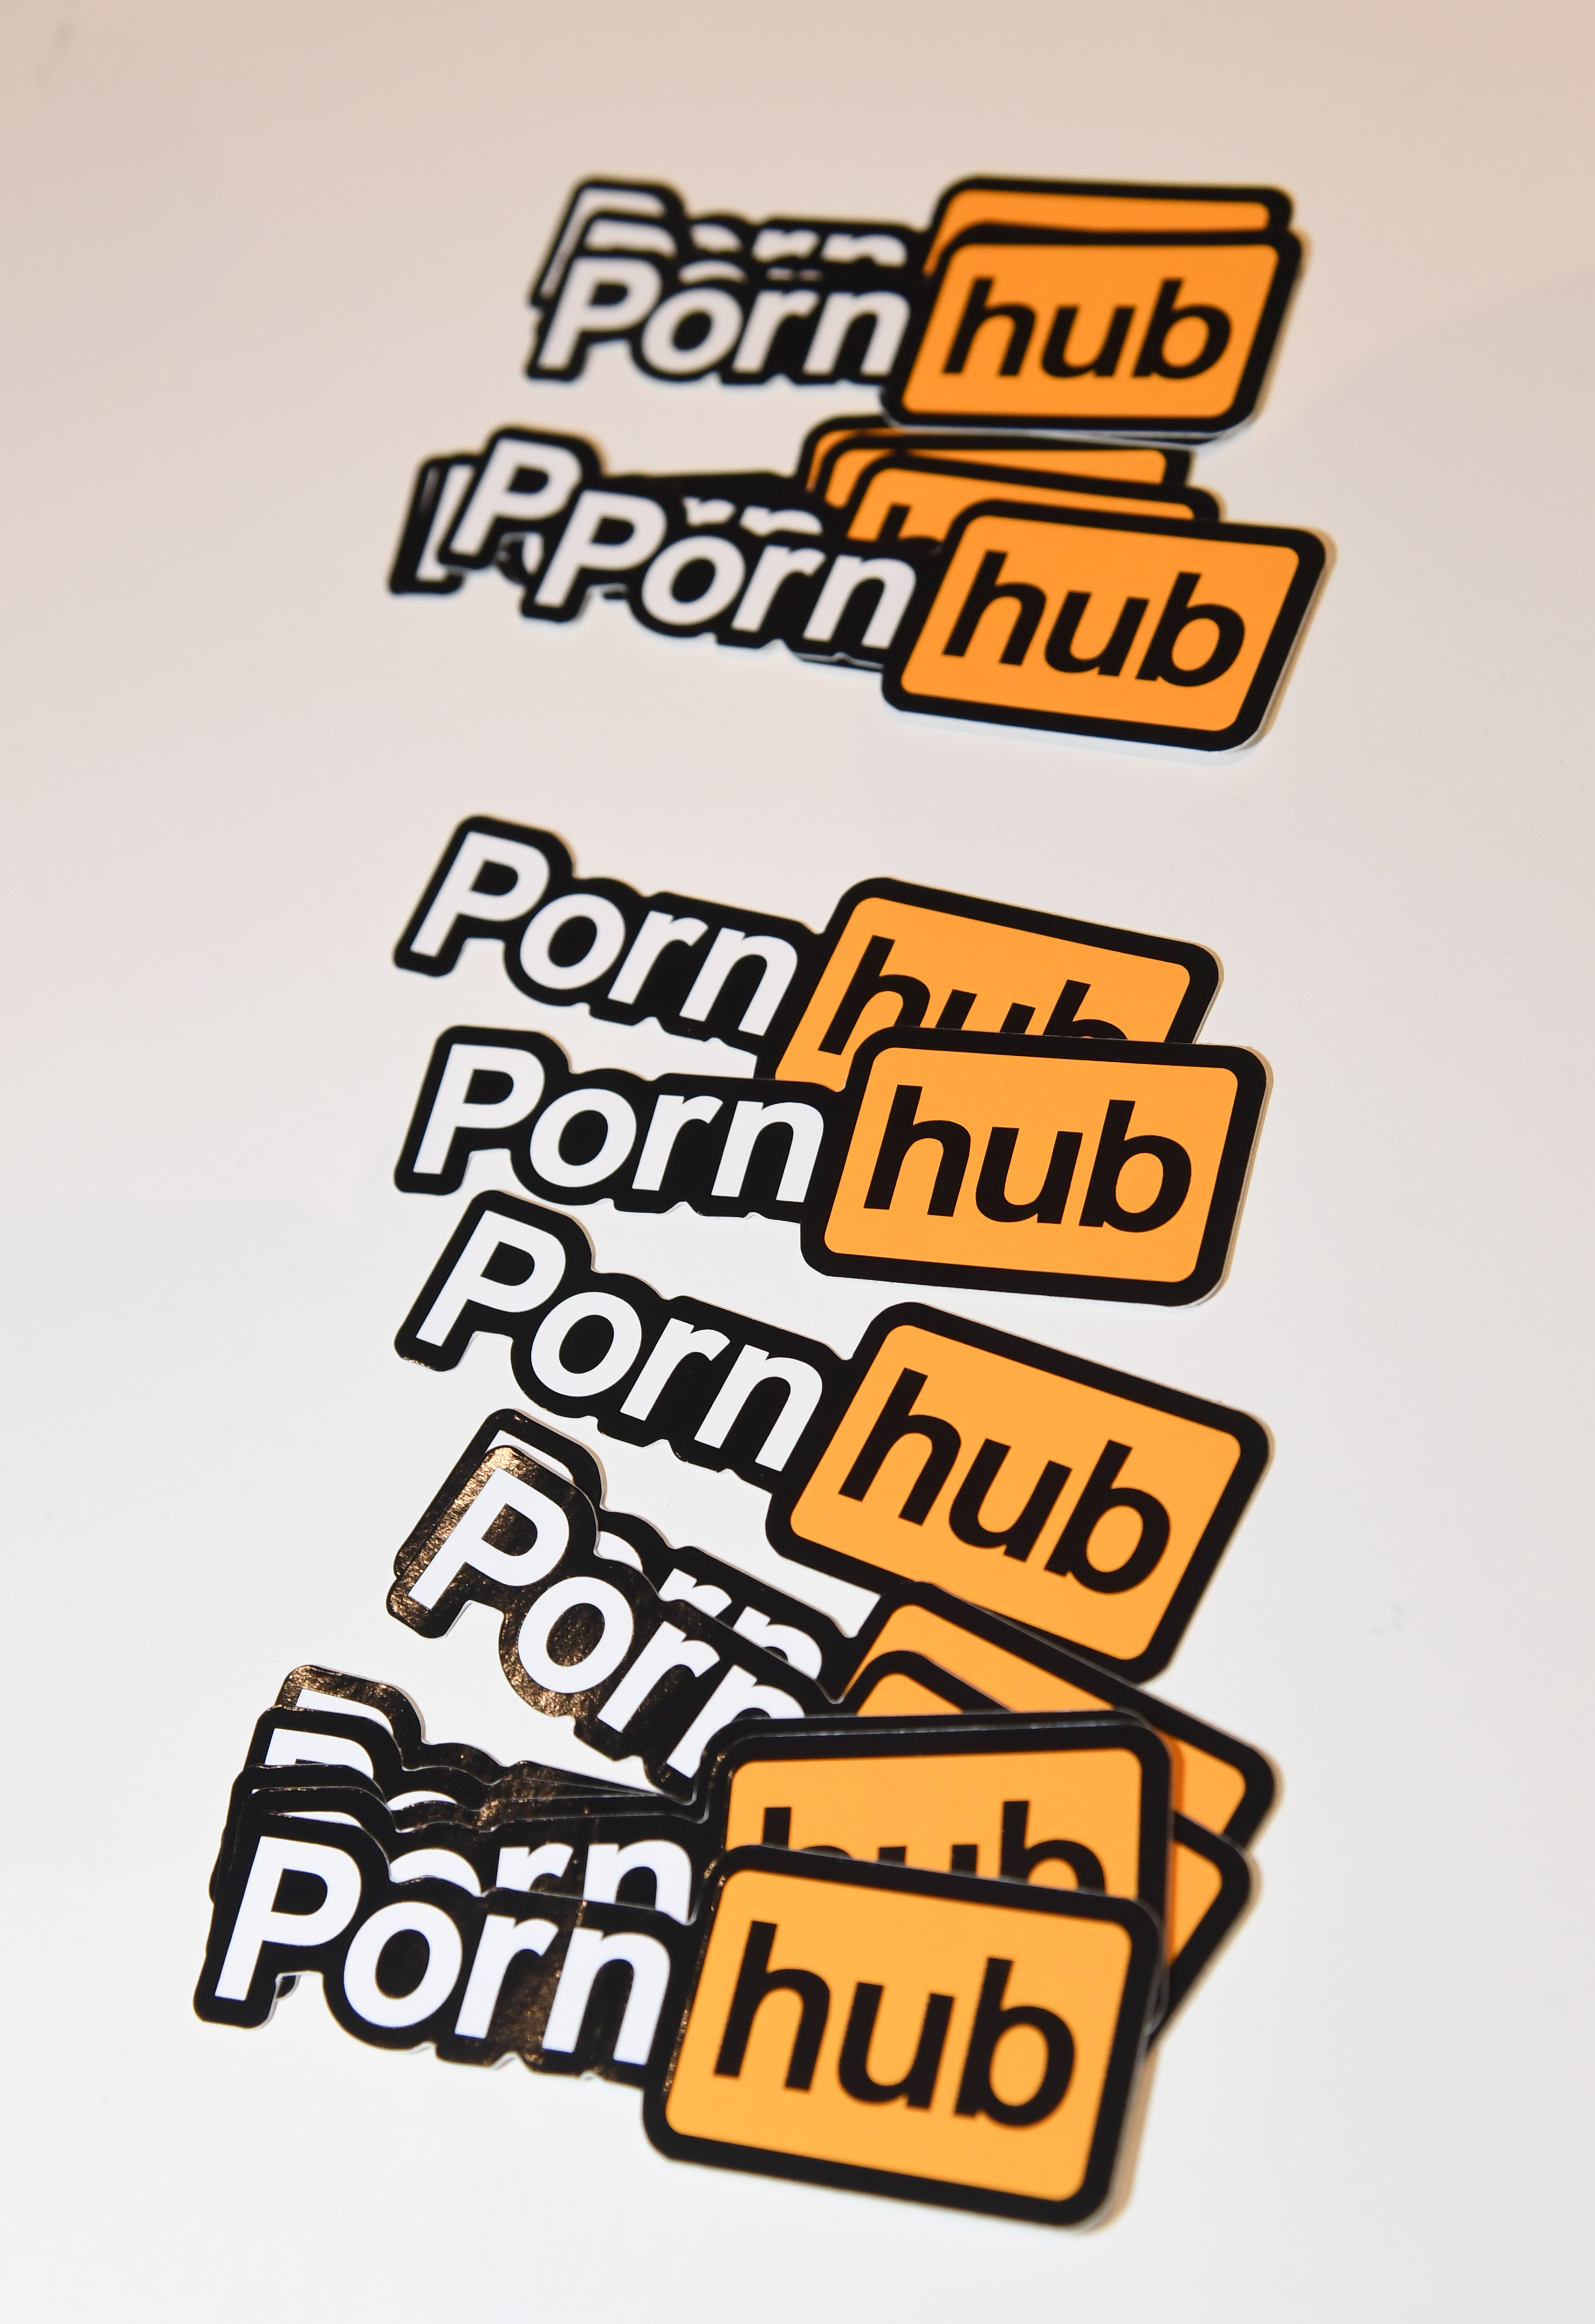 Pornhub Just Purged All Unverified Content From the Platform photo picture